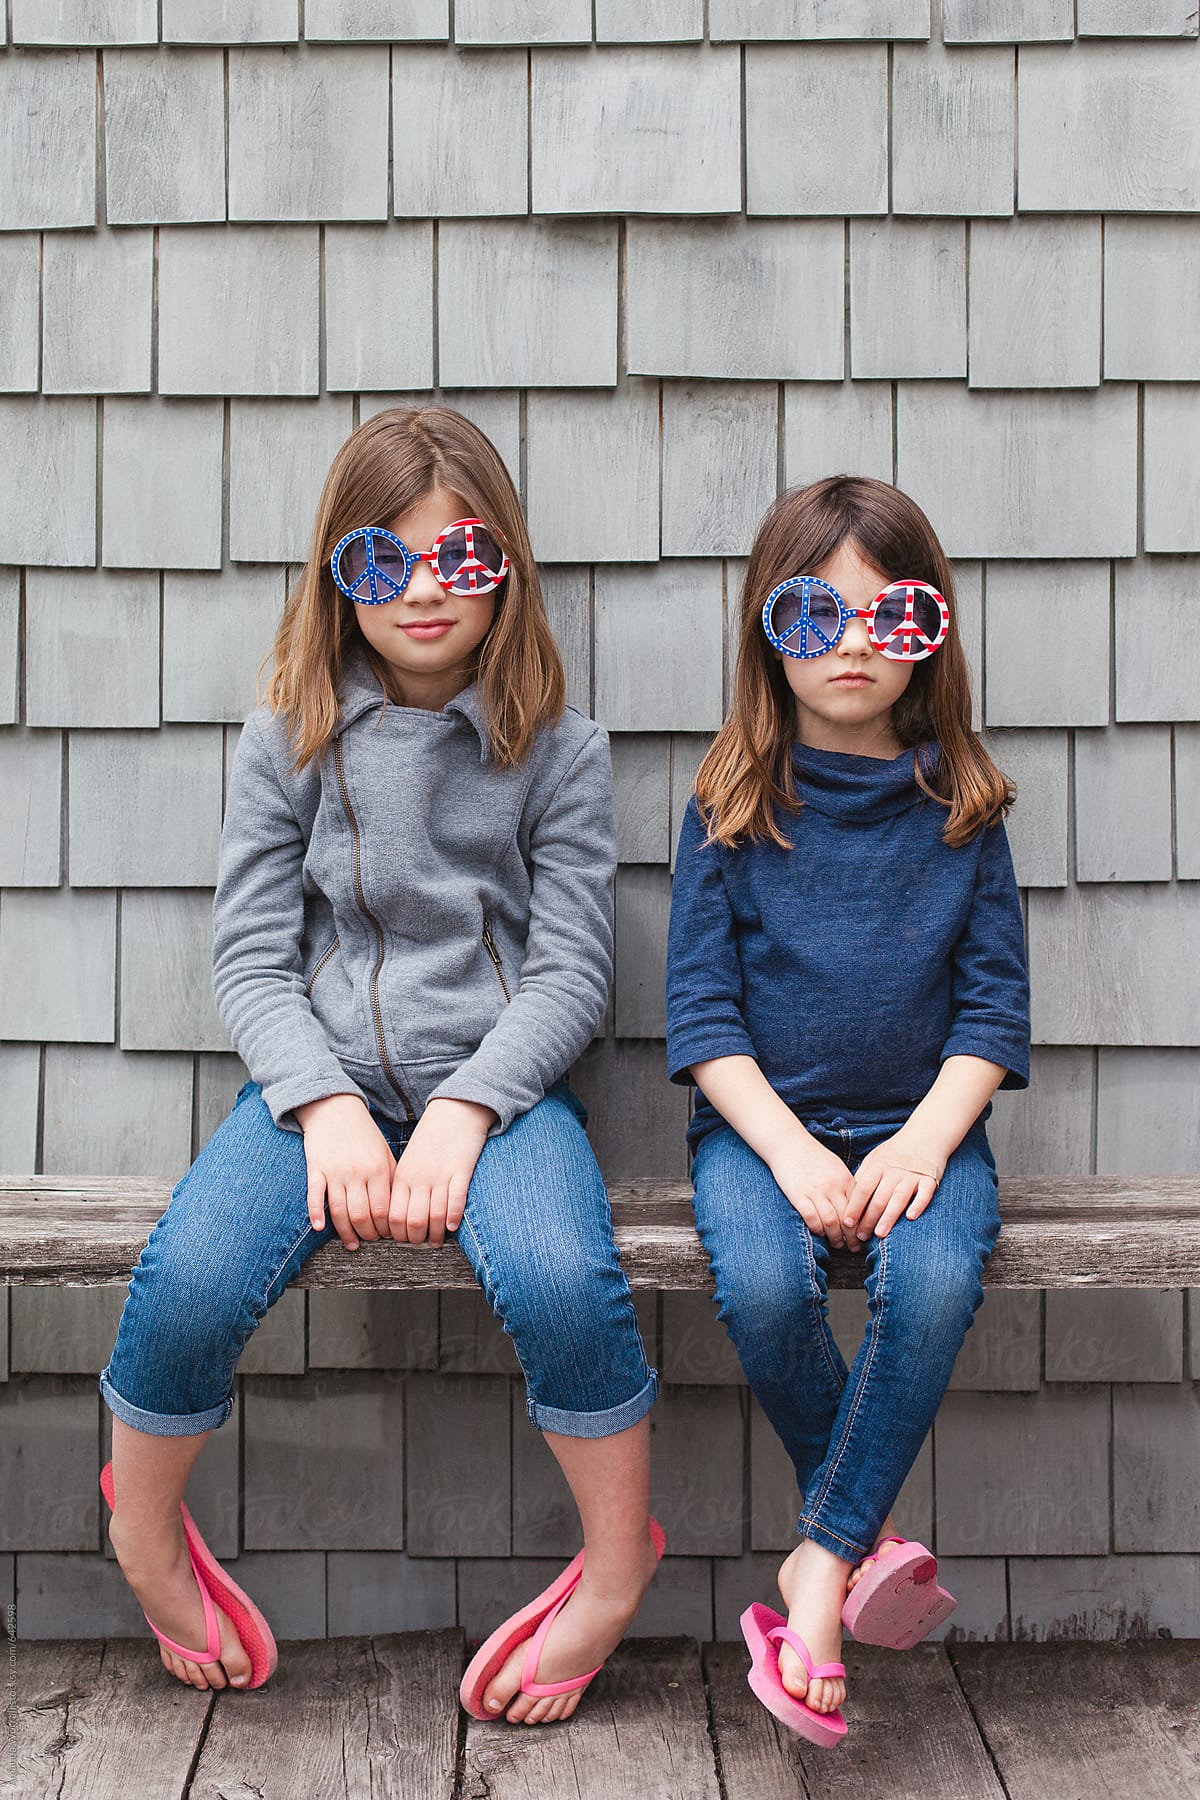 Solemn Sisters Wearing Patriotic Peace Sign Sunglasses By Stocksy Contributor Amanda Worrall